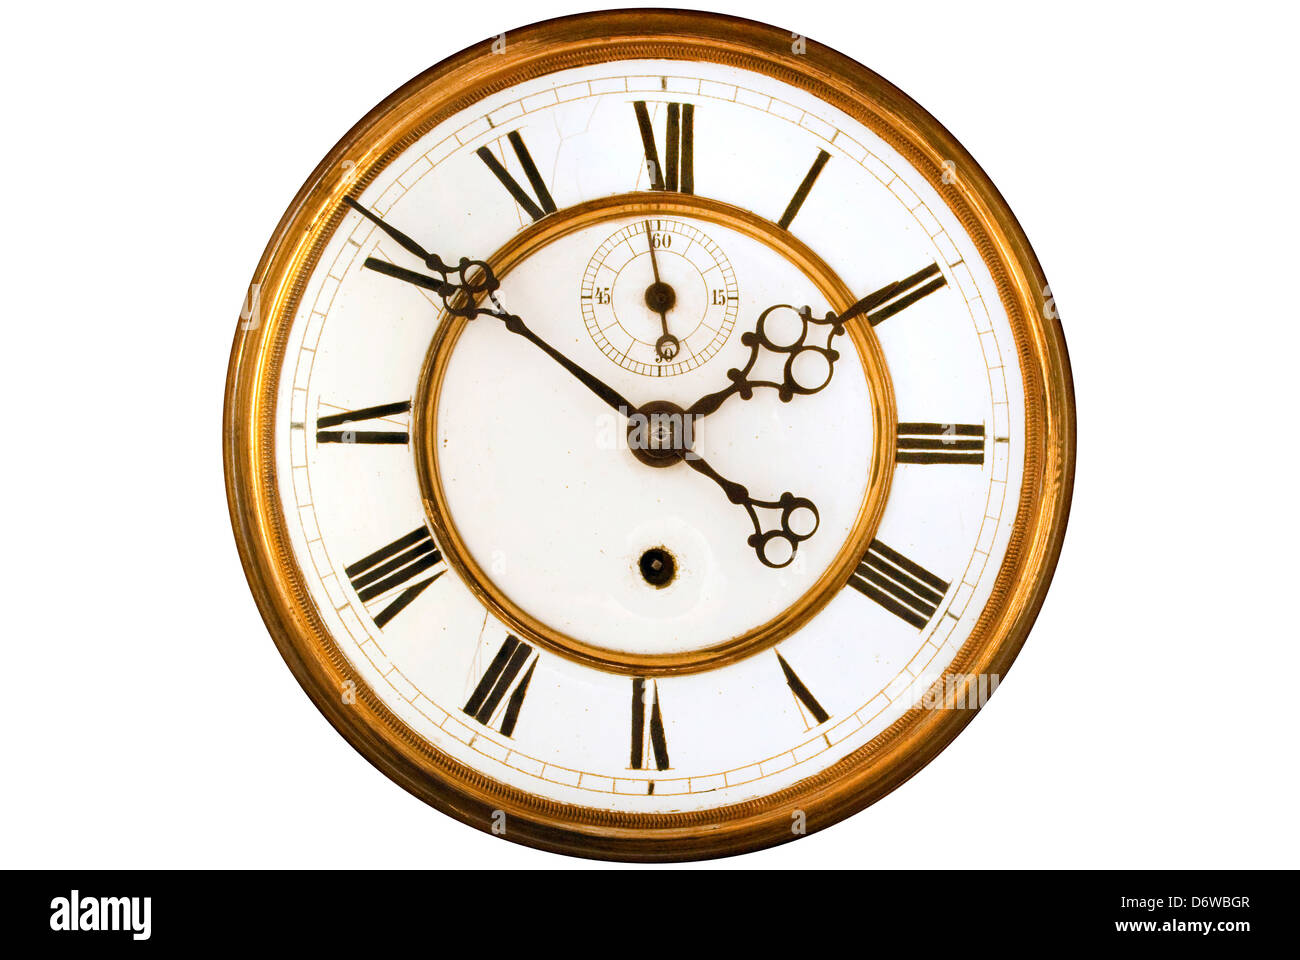 Old clock face with Roman numerals Stock Photo